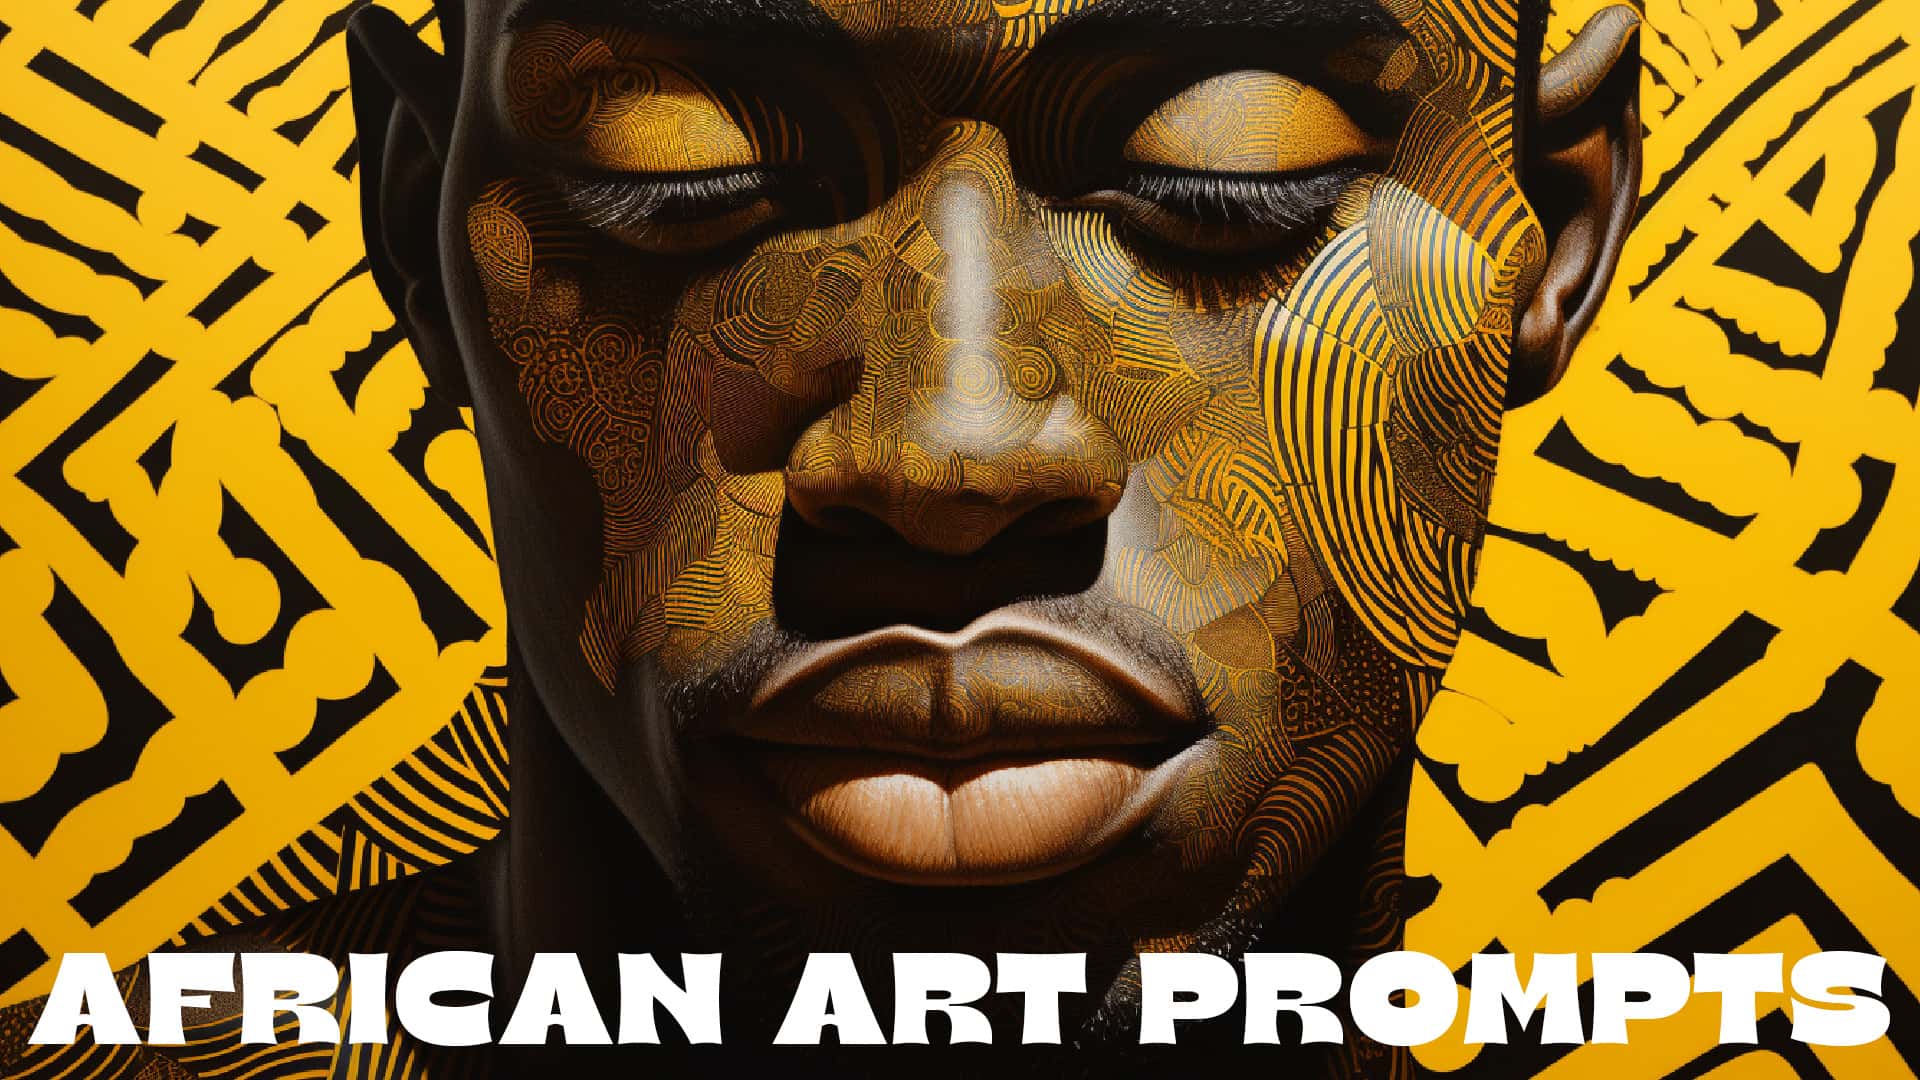 African Art Prompts